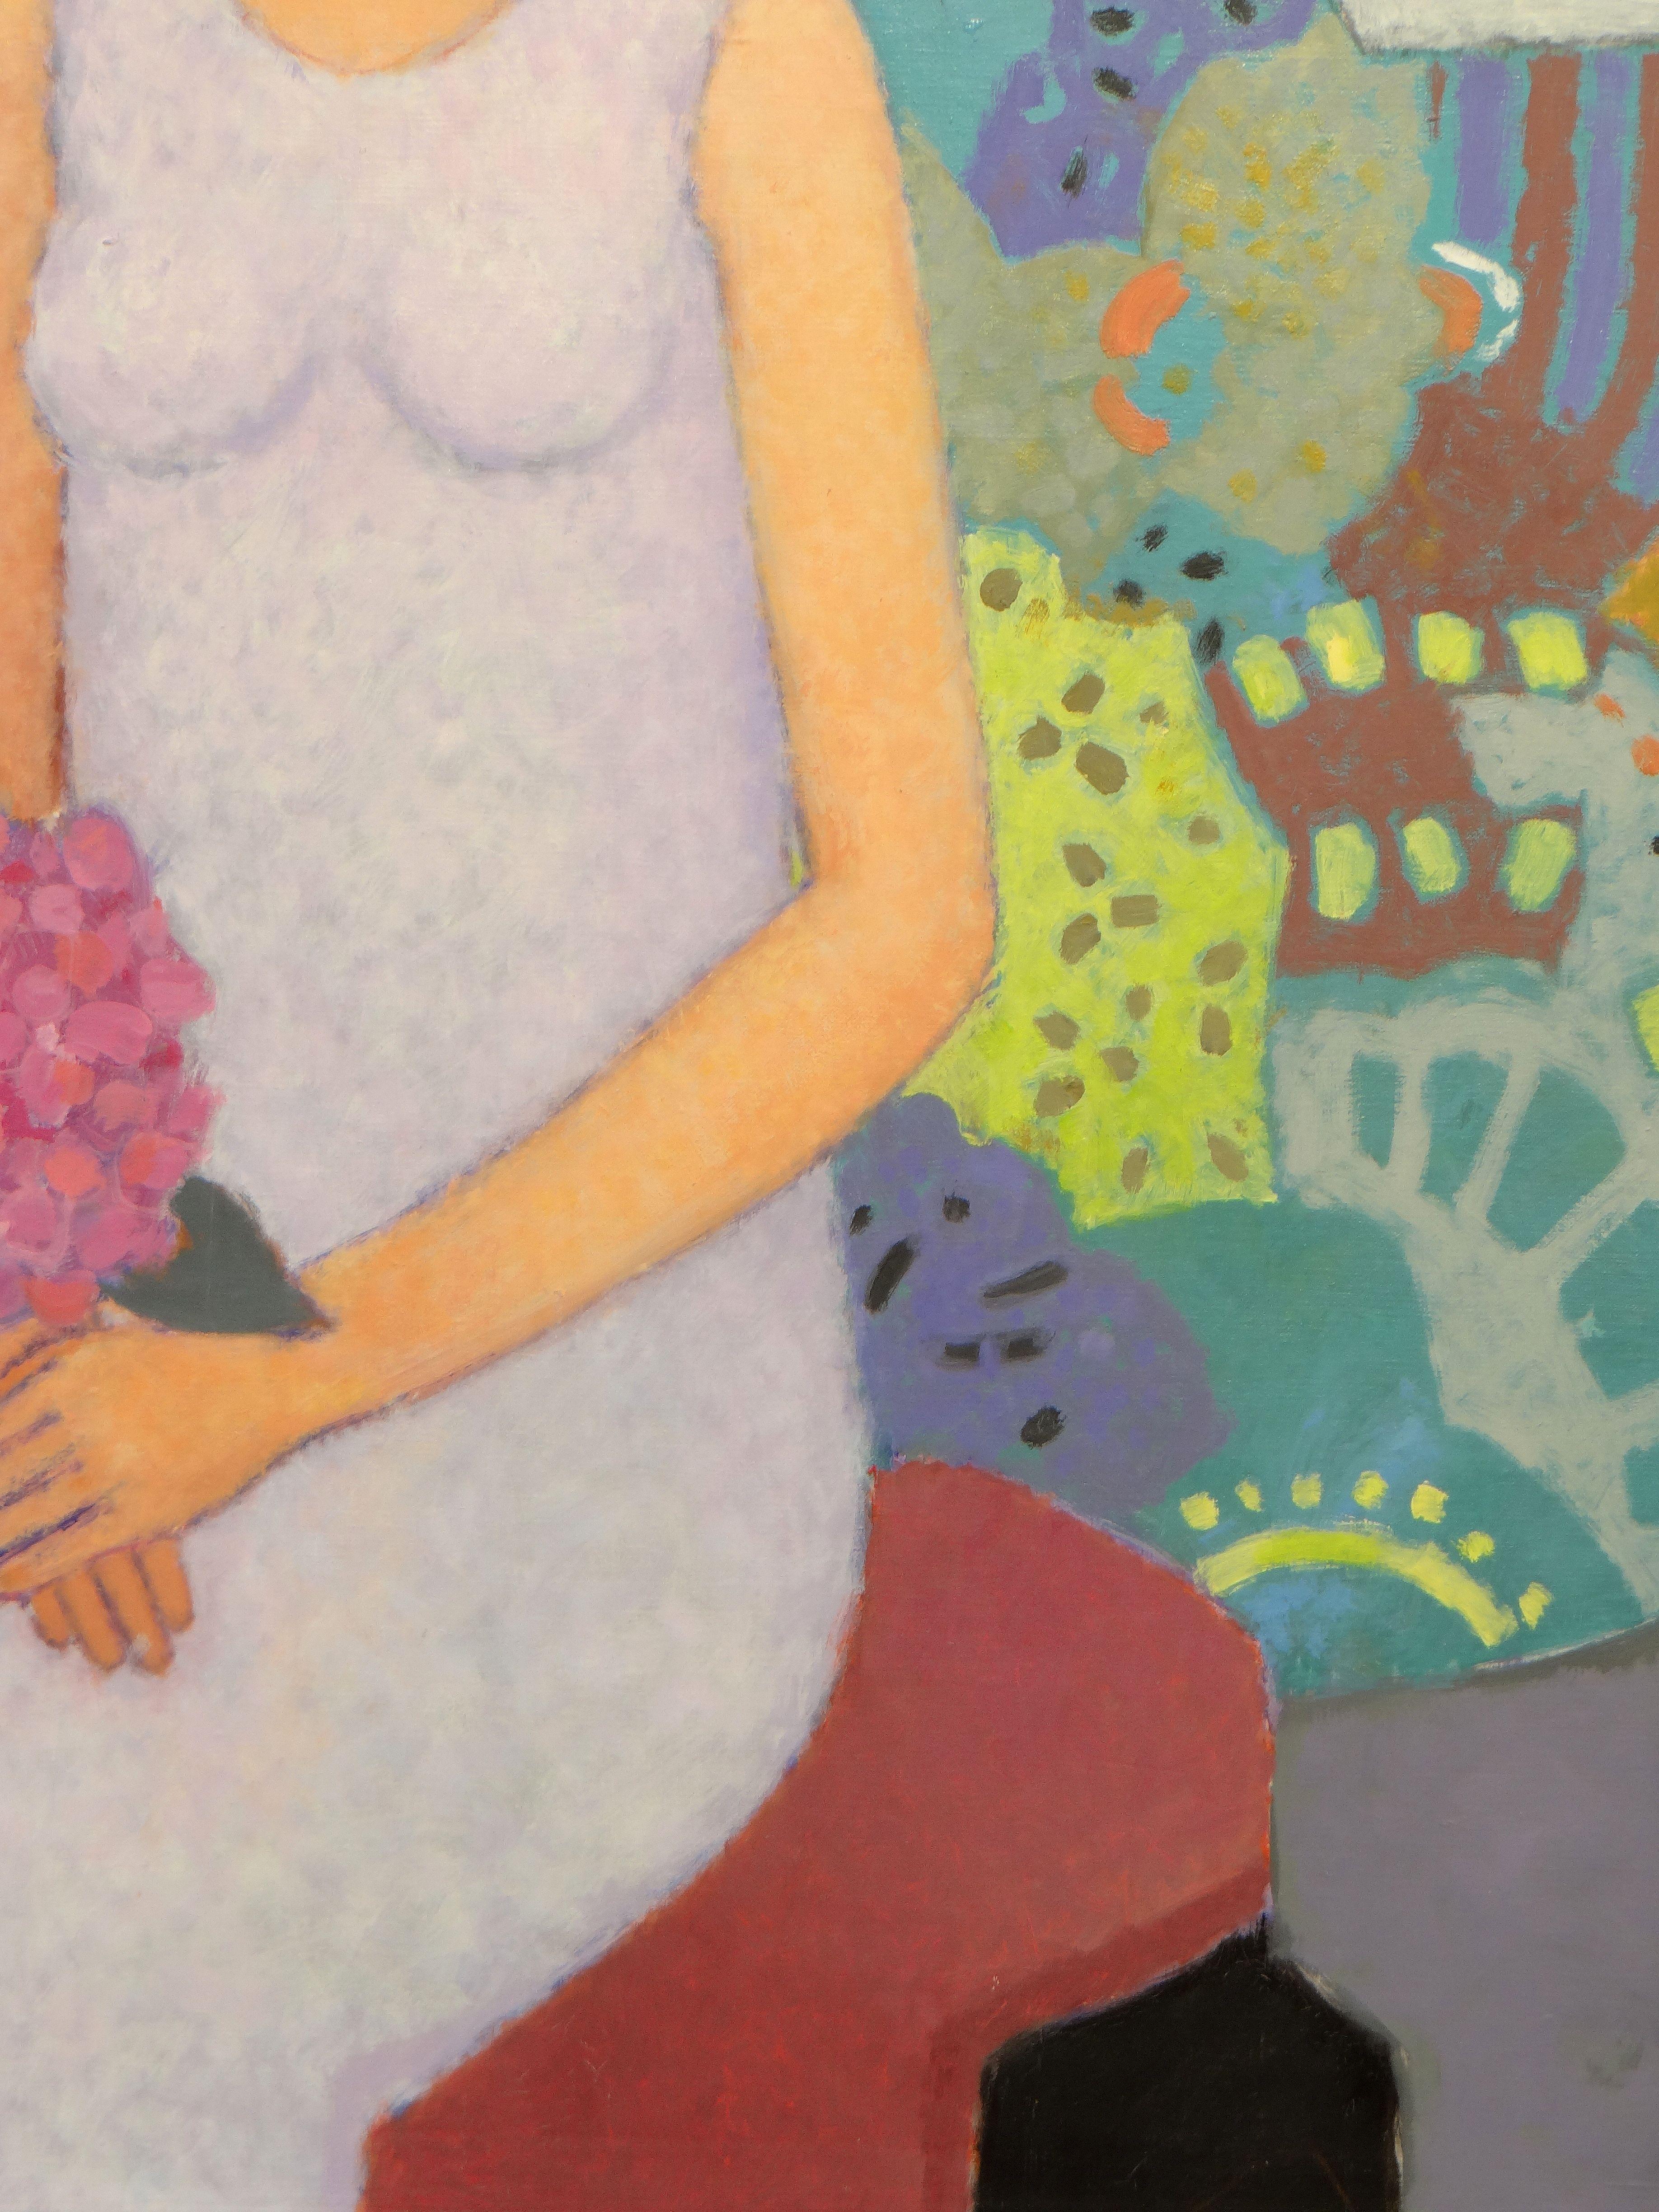 Painted Kimiyo Masuda, Painting Young Women with Bouquet of Flowers, 1988